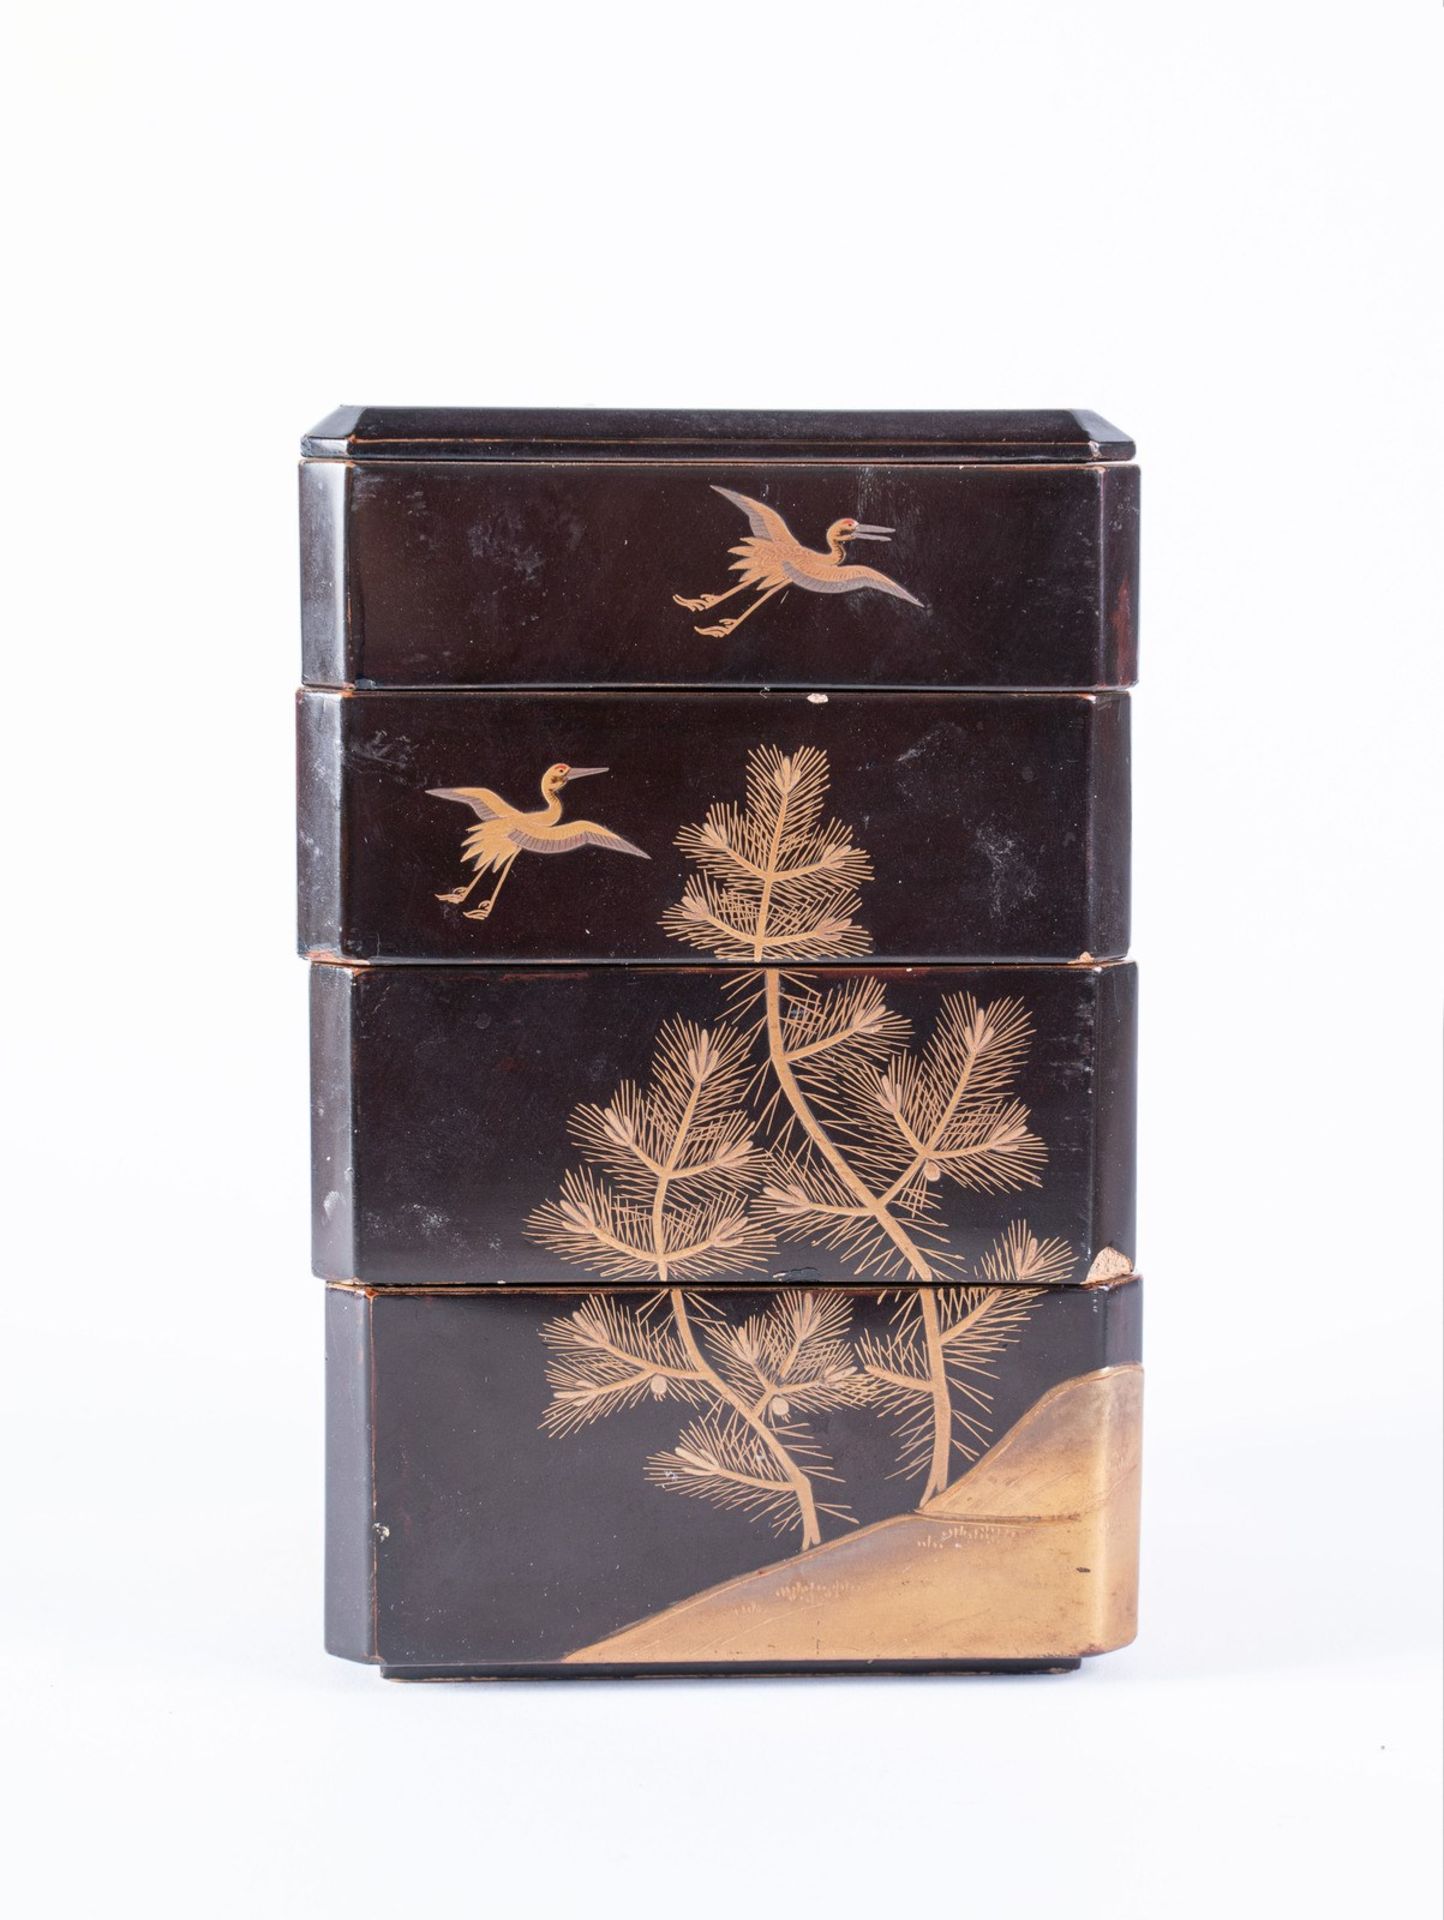 ARTE GIAPPONESE A four-level lacquer box decorated with cranes and trees Japan, 19th-20th.